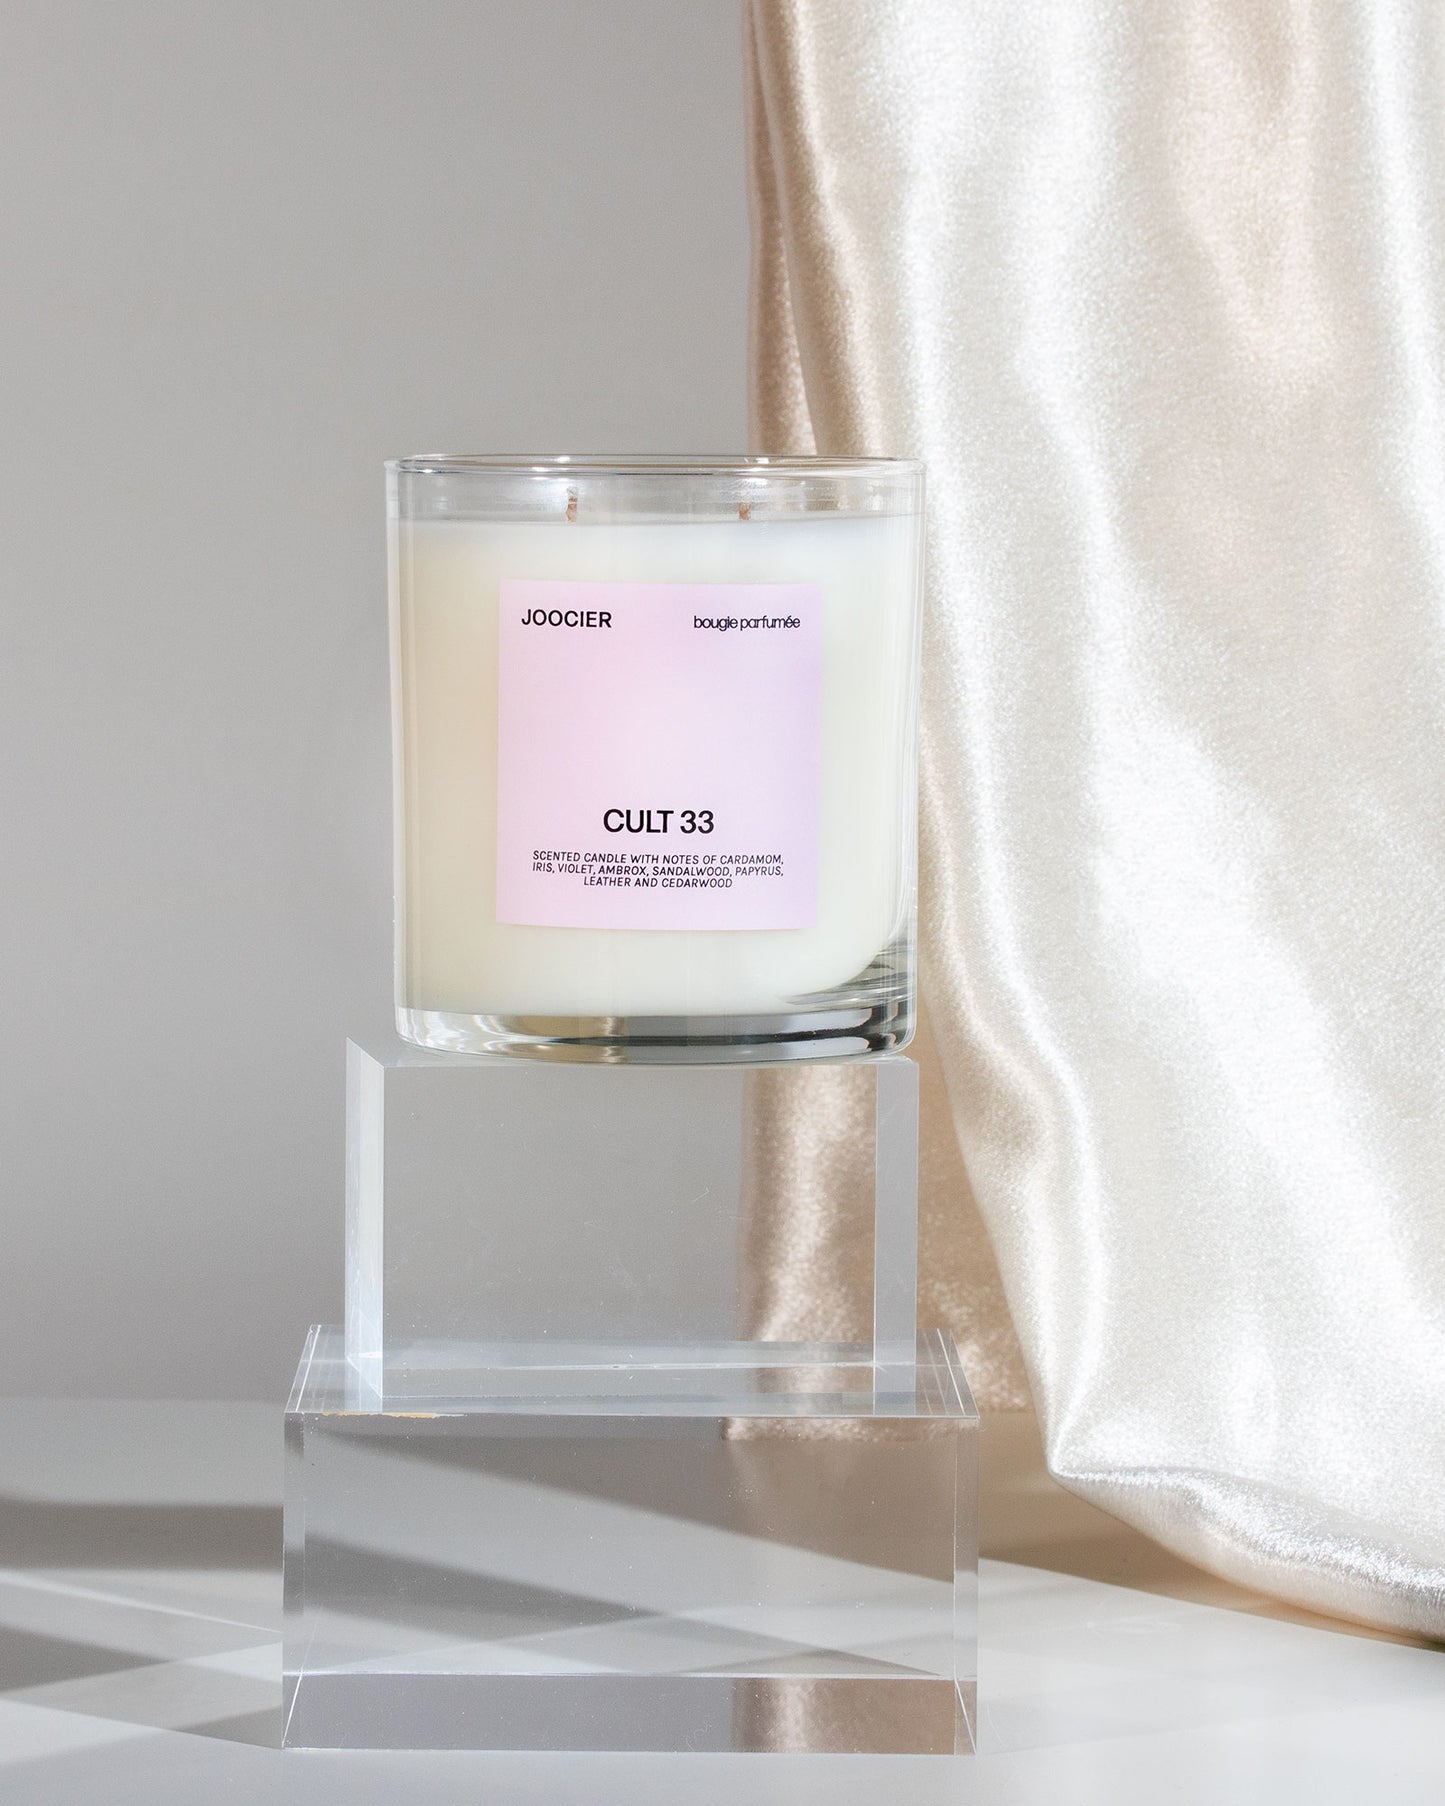 Cult 33 candle inspired by Le Labo Santal 33